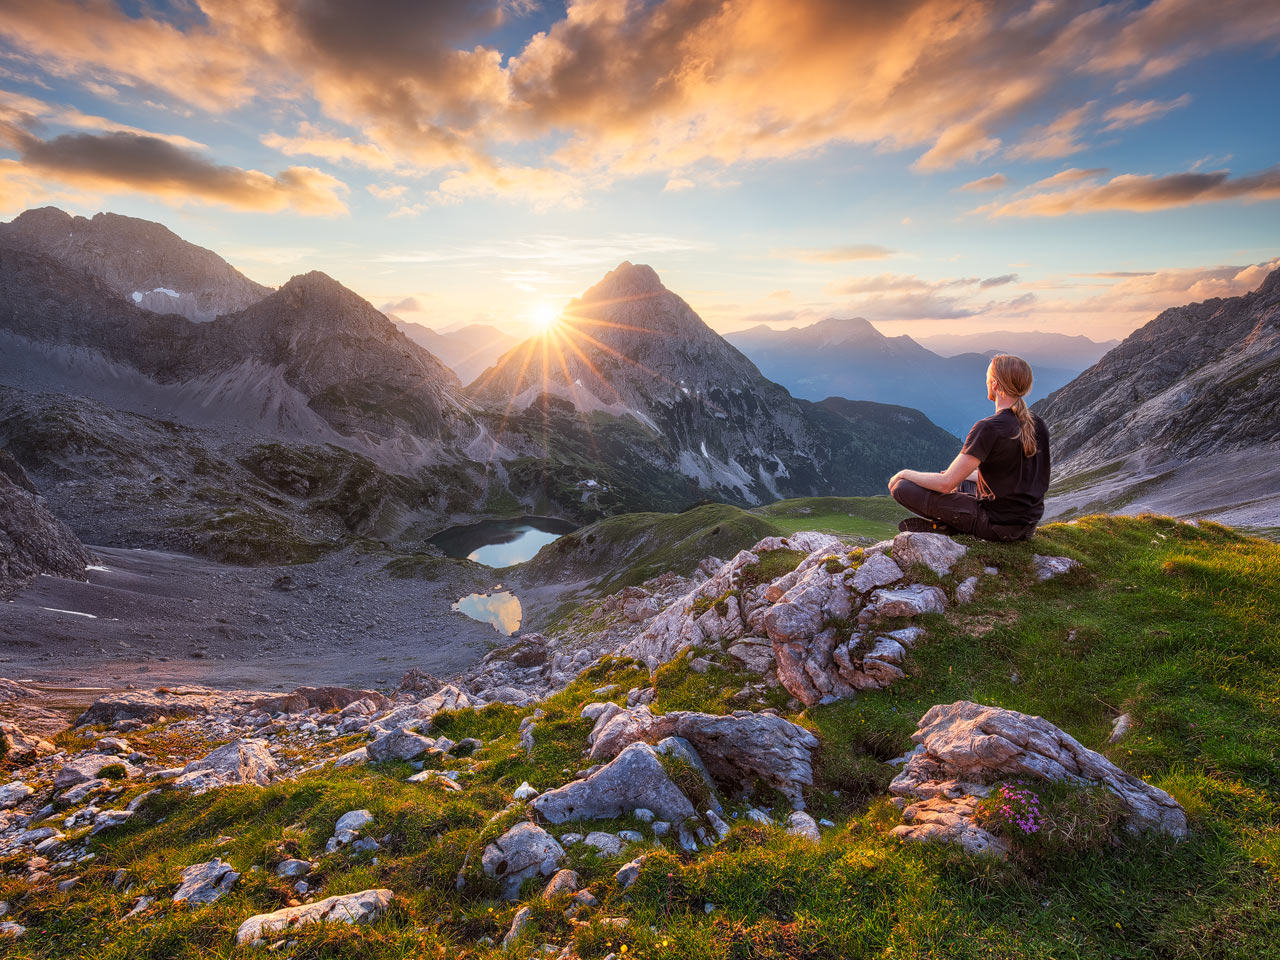 A person meditating in the Austrial mountains with the setting sun.